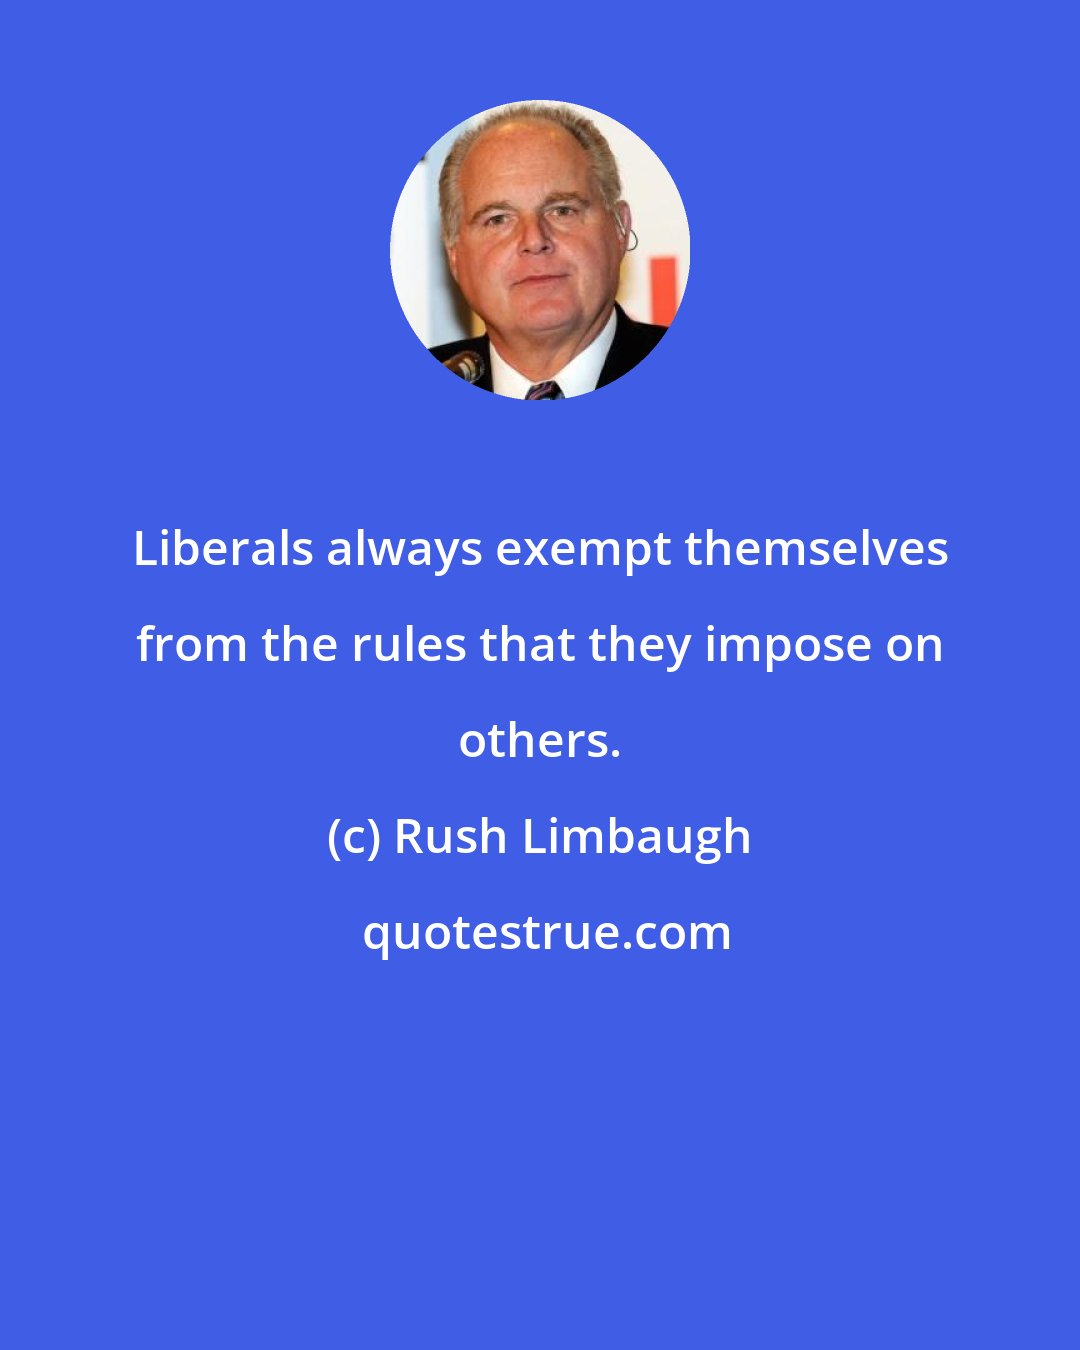 Rush Limbaugh: Liberals always exempt themselves from the rules that they impose on others.